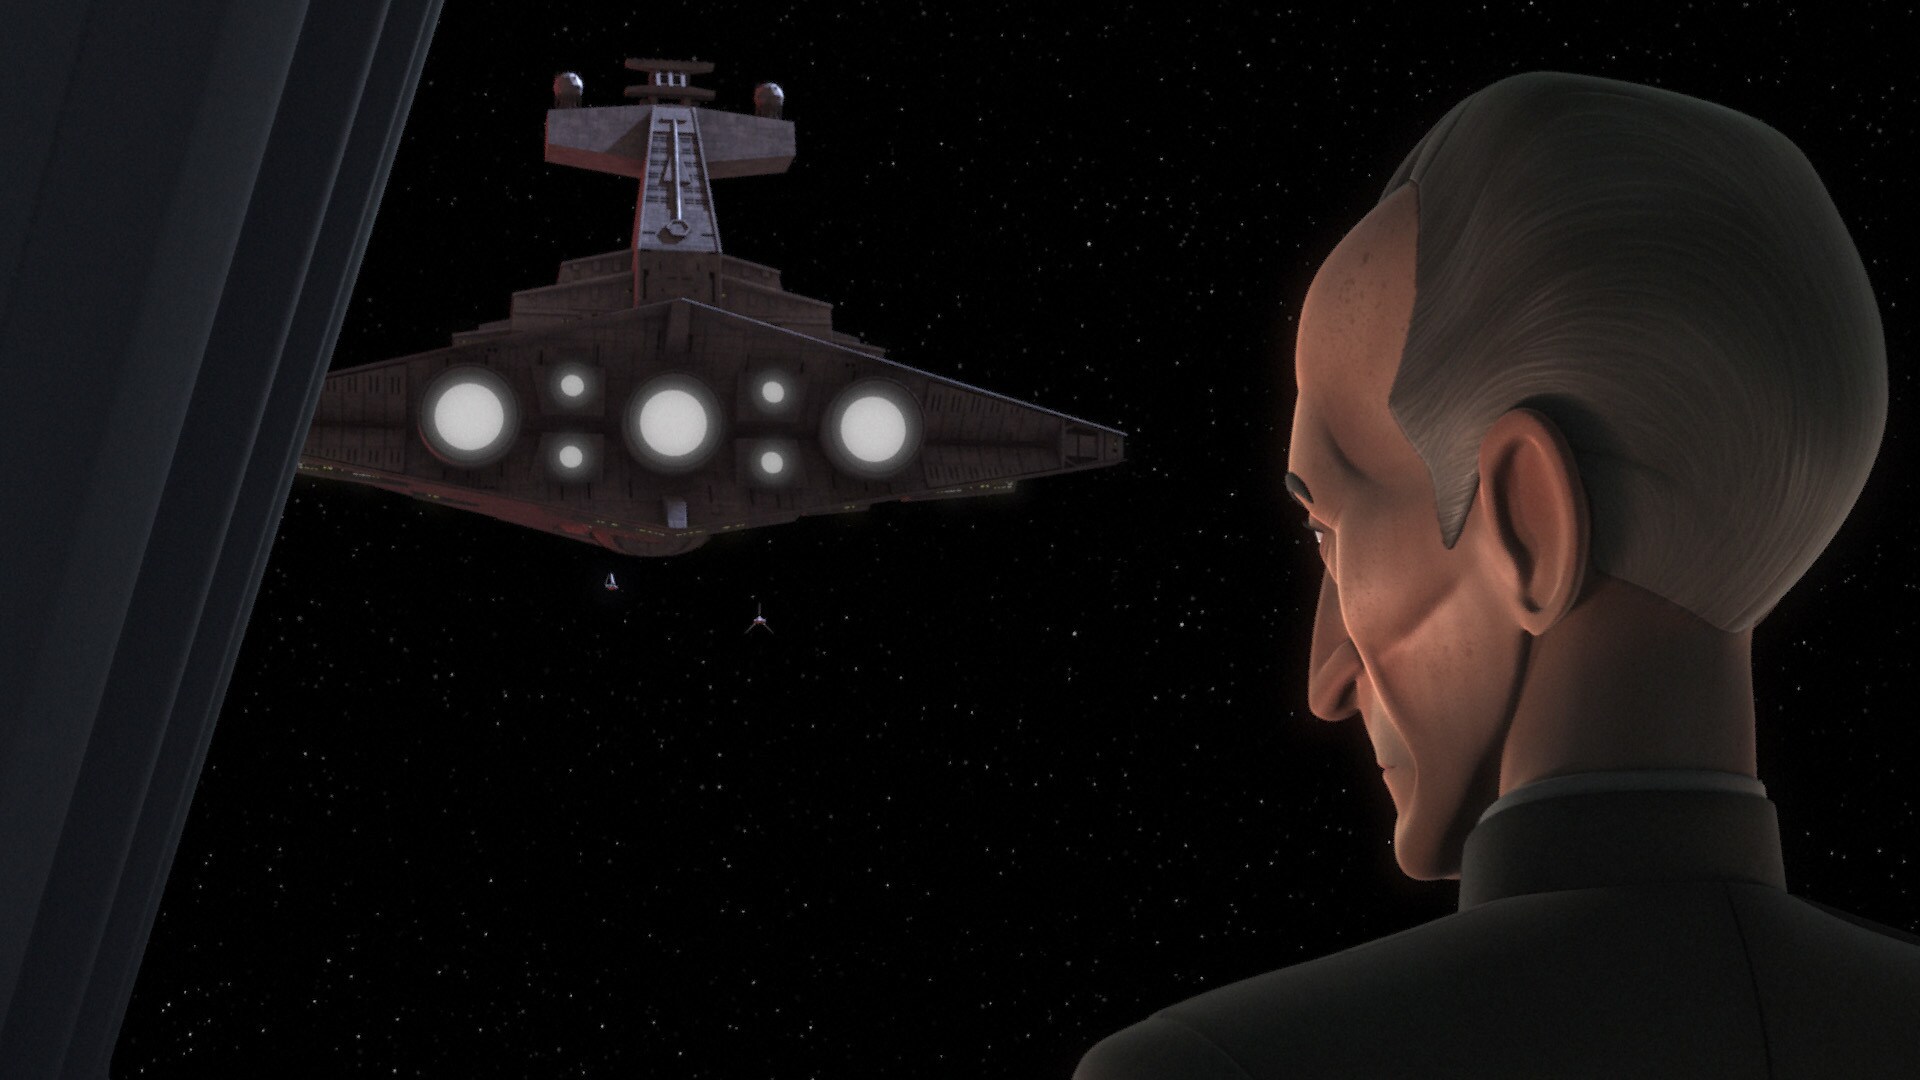 Grand Moff Tarkin orders the Imperial fleet to clear out -- and send reinforcements.